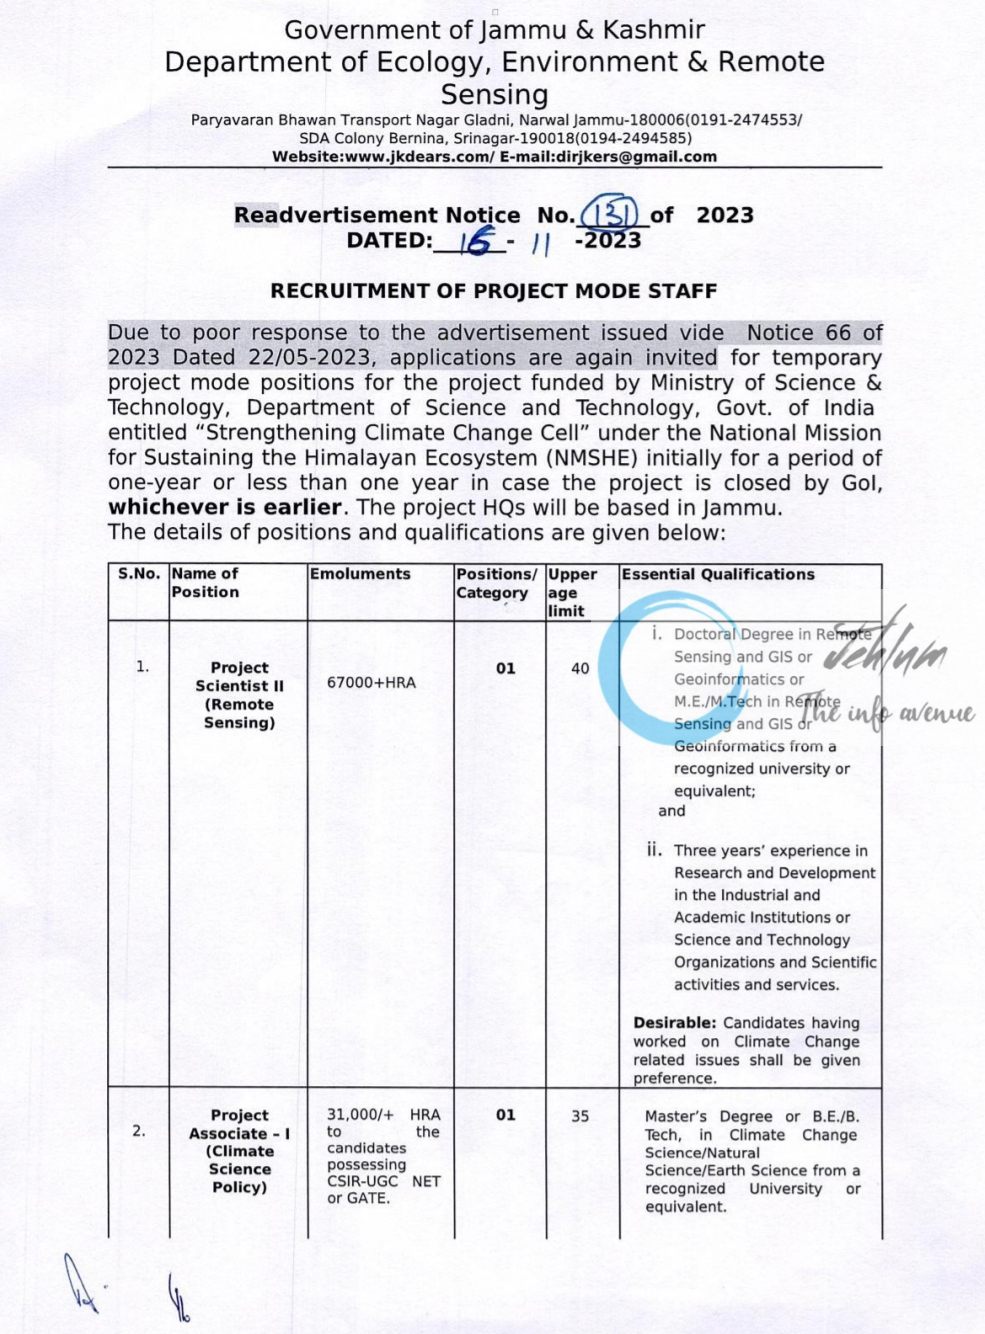 JKDEARS RECRUITMENT OF PROJECT MODE STAFF RE-ADVERTISEMENT NOTICE NO 131 OF 2023